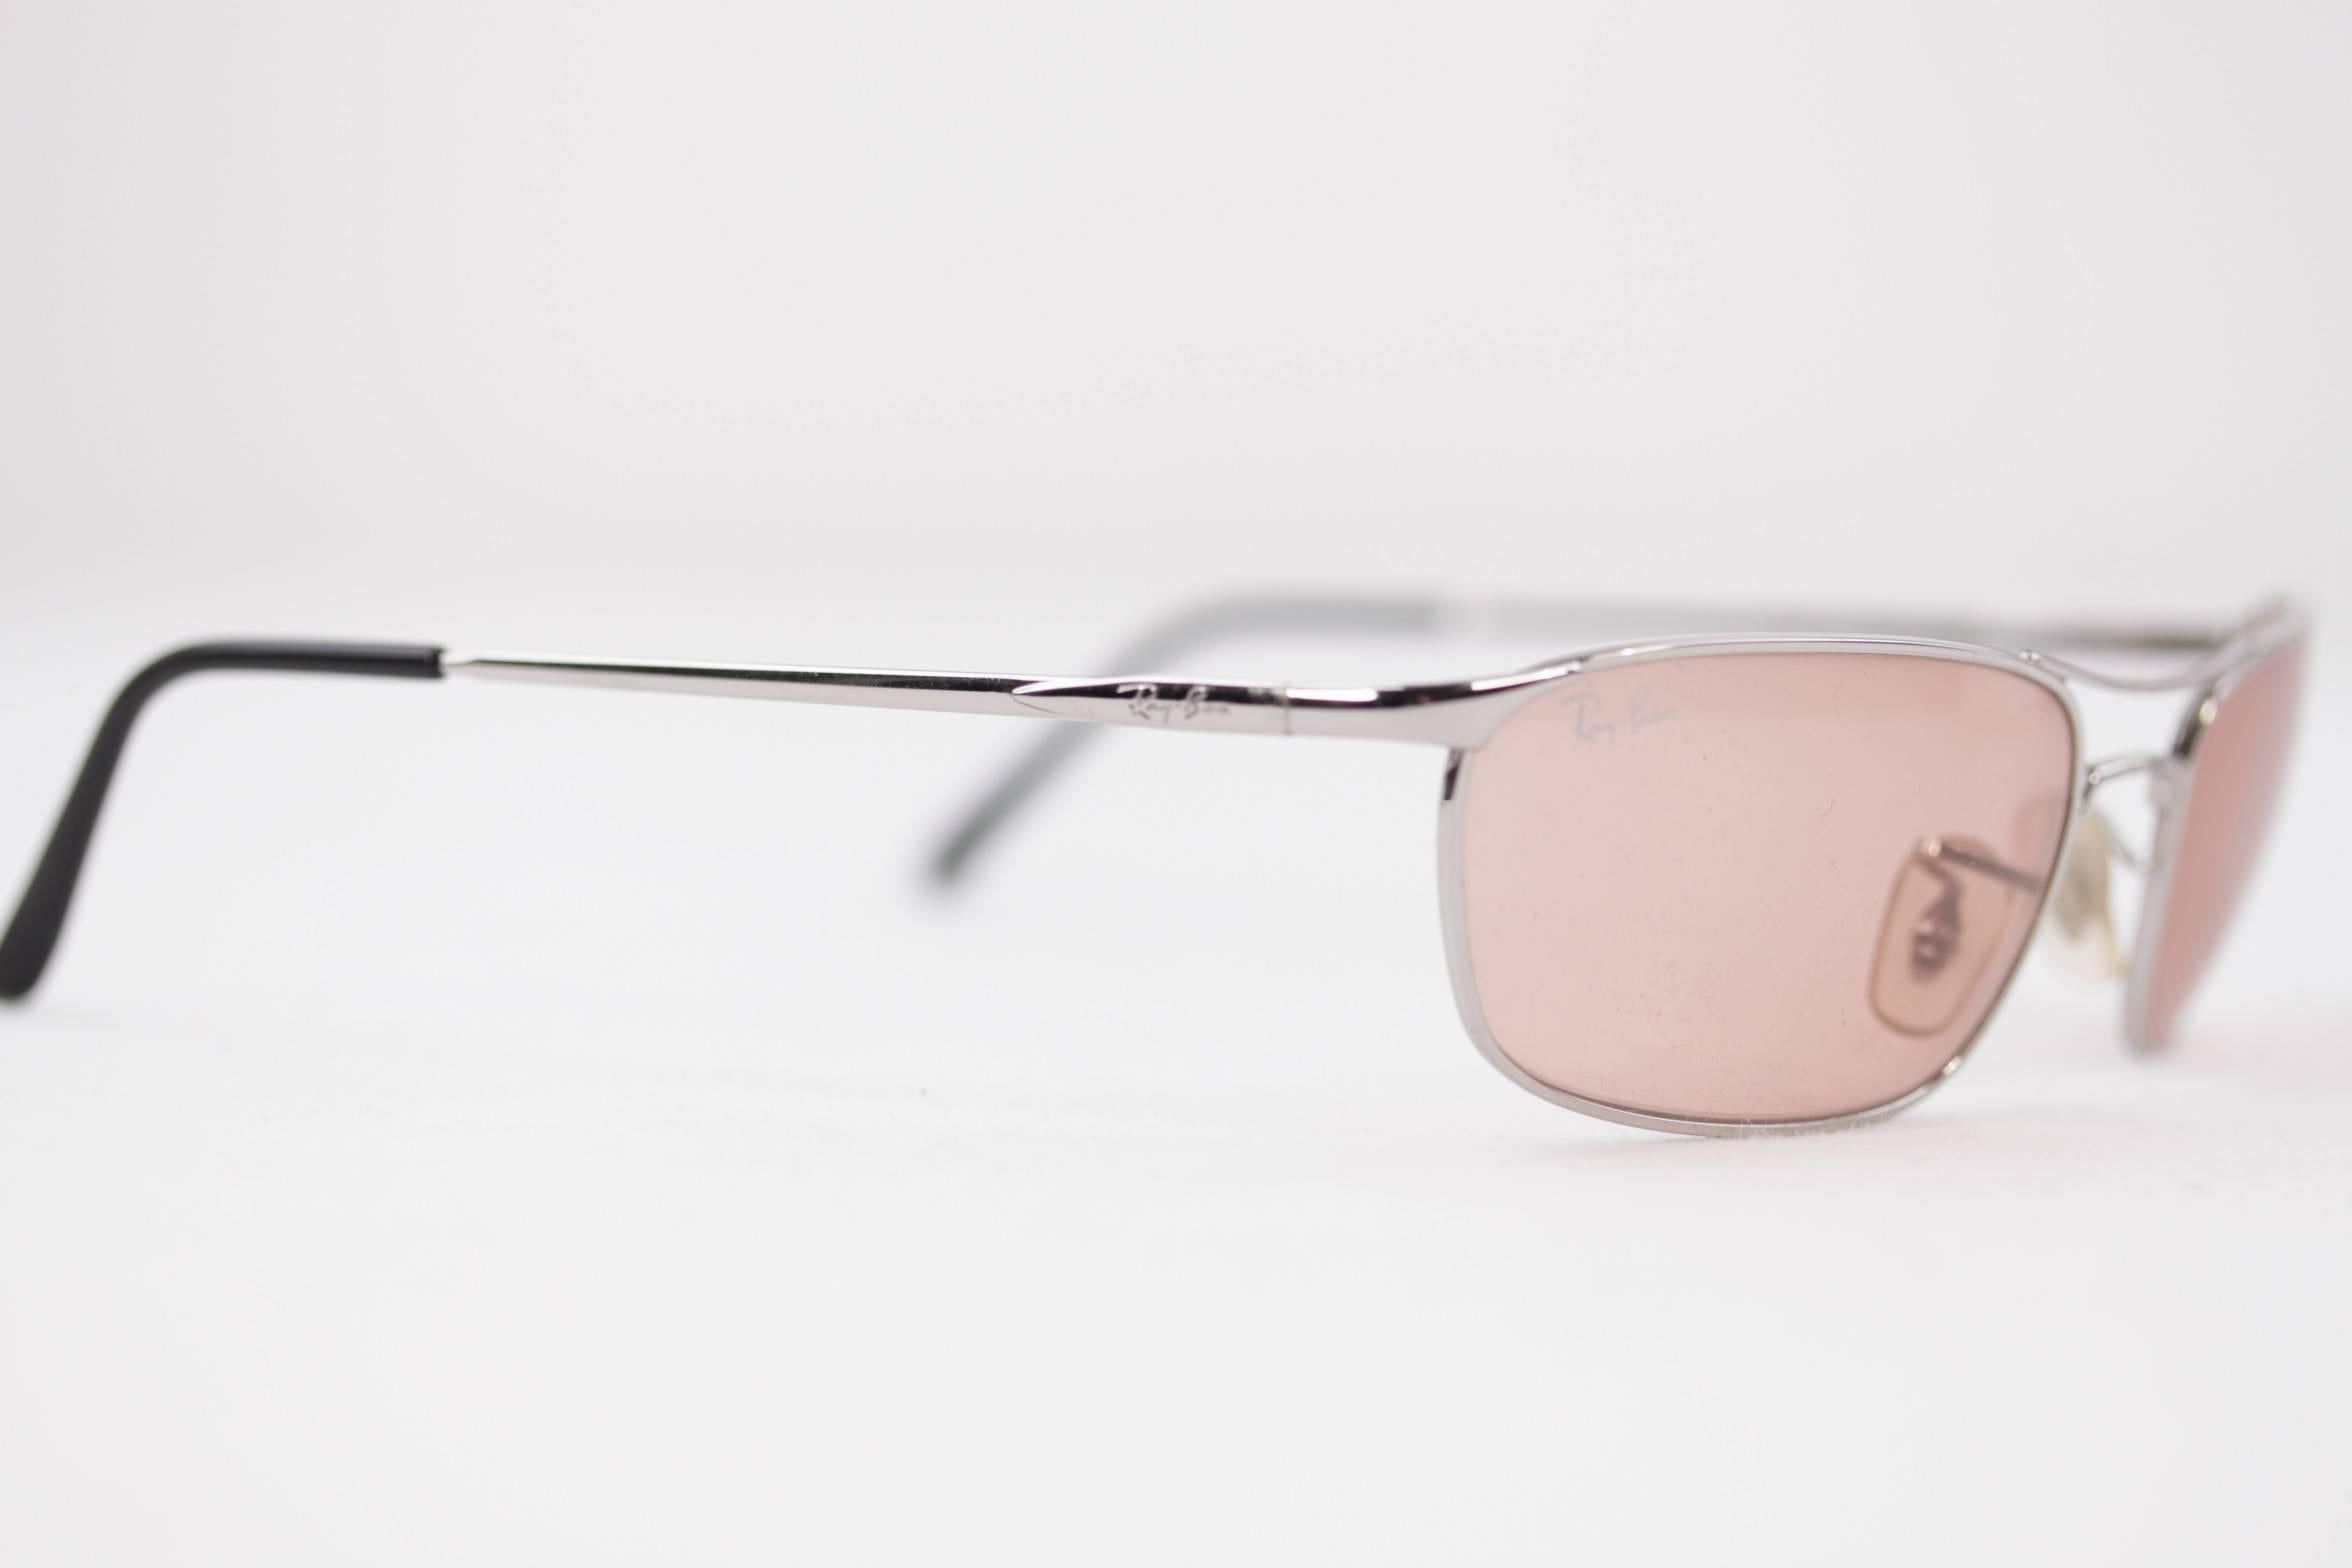 - Model: RB 3132 - 003/50 - 54/18

- Vintage stock, hardly any wear. Please follow reading for details

- Silver metal frame, with black plastic arm ends, RB etched on nose pads

- FLEX-HINGES, Frame made in Italy

- Original RAY BAN Pink Lenses 

-